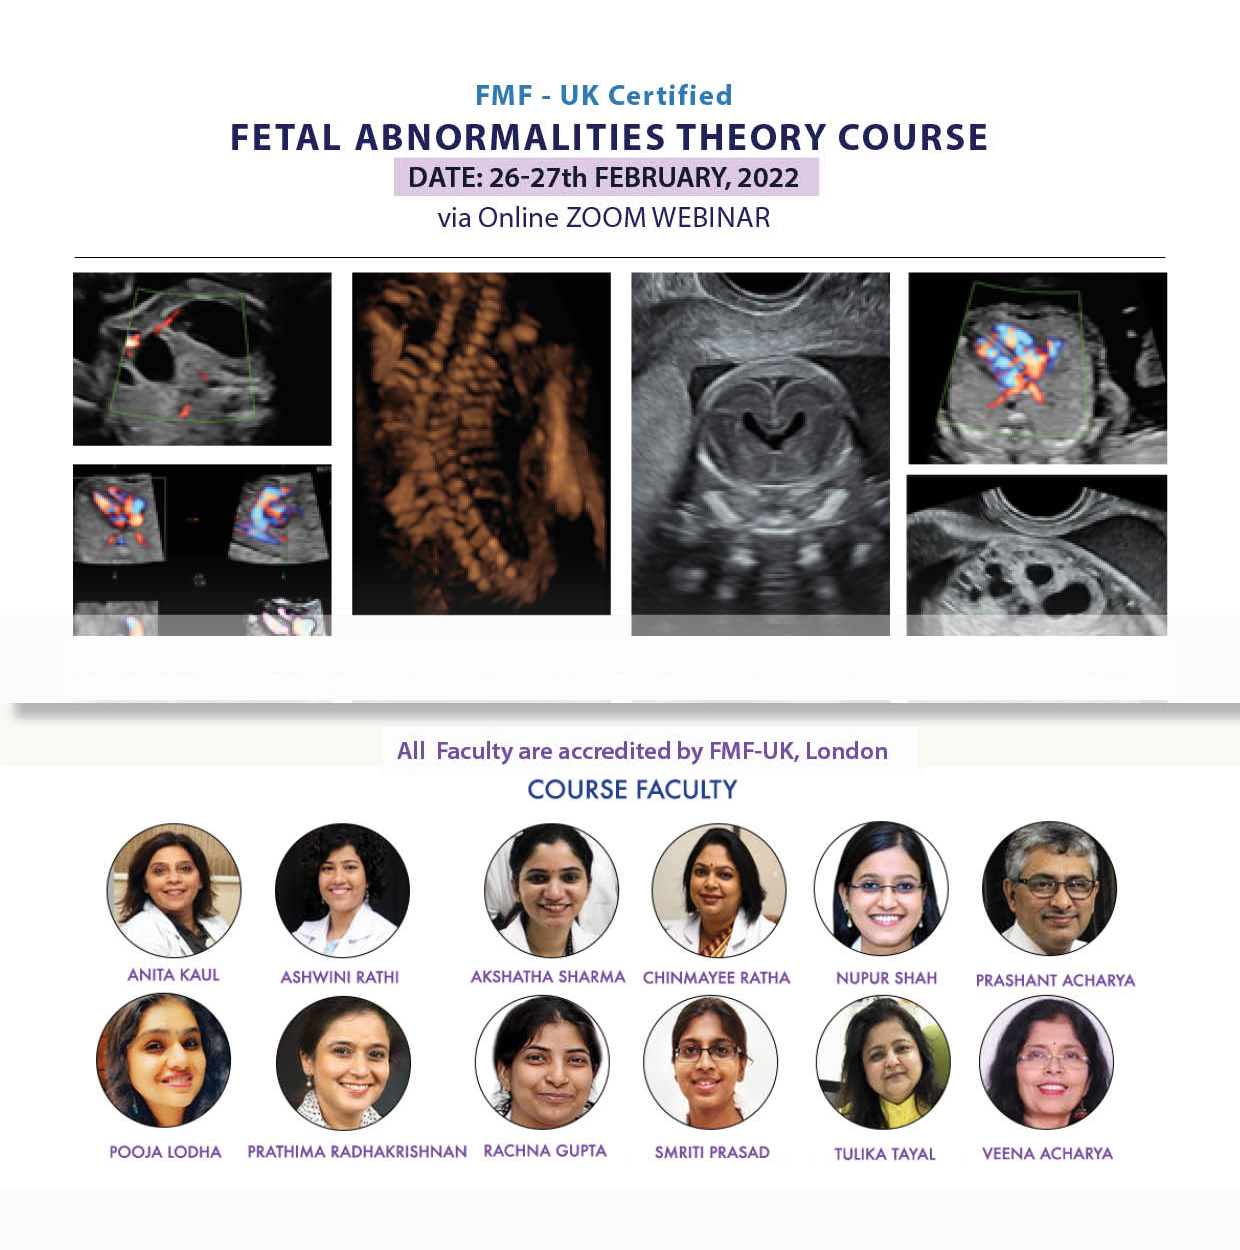 fmf-uk approved fetal abnormalities theory course